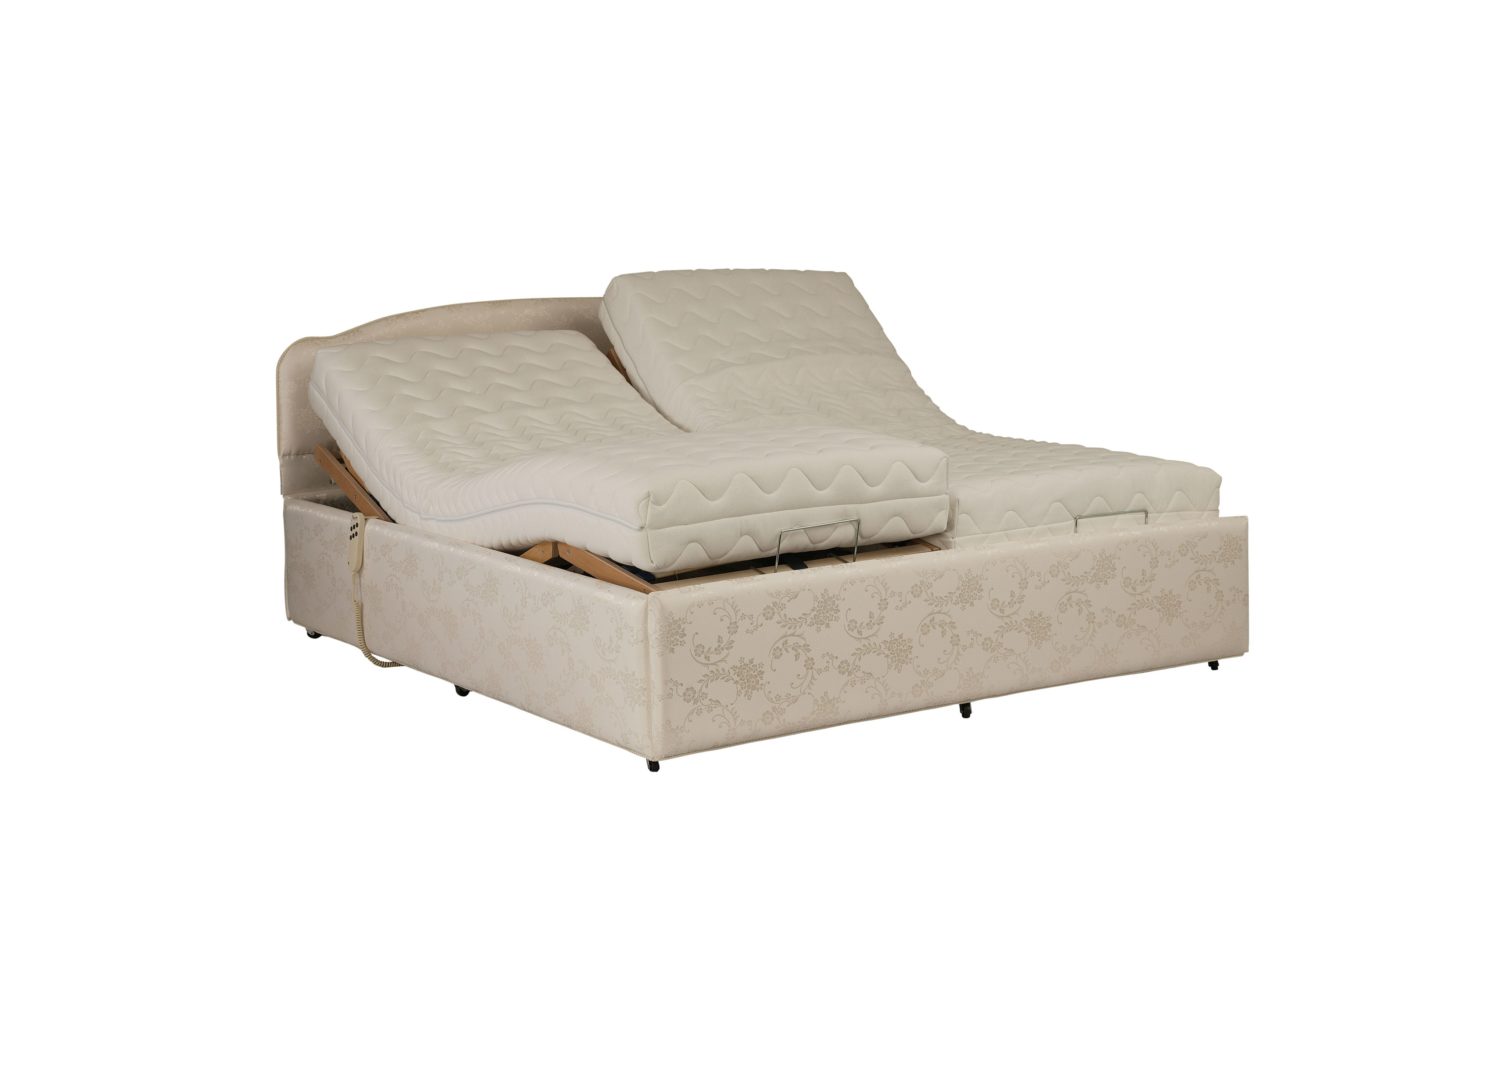 The Windsor Double Adjustable Bed